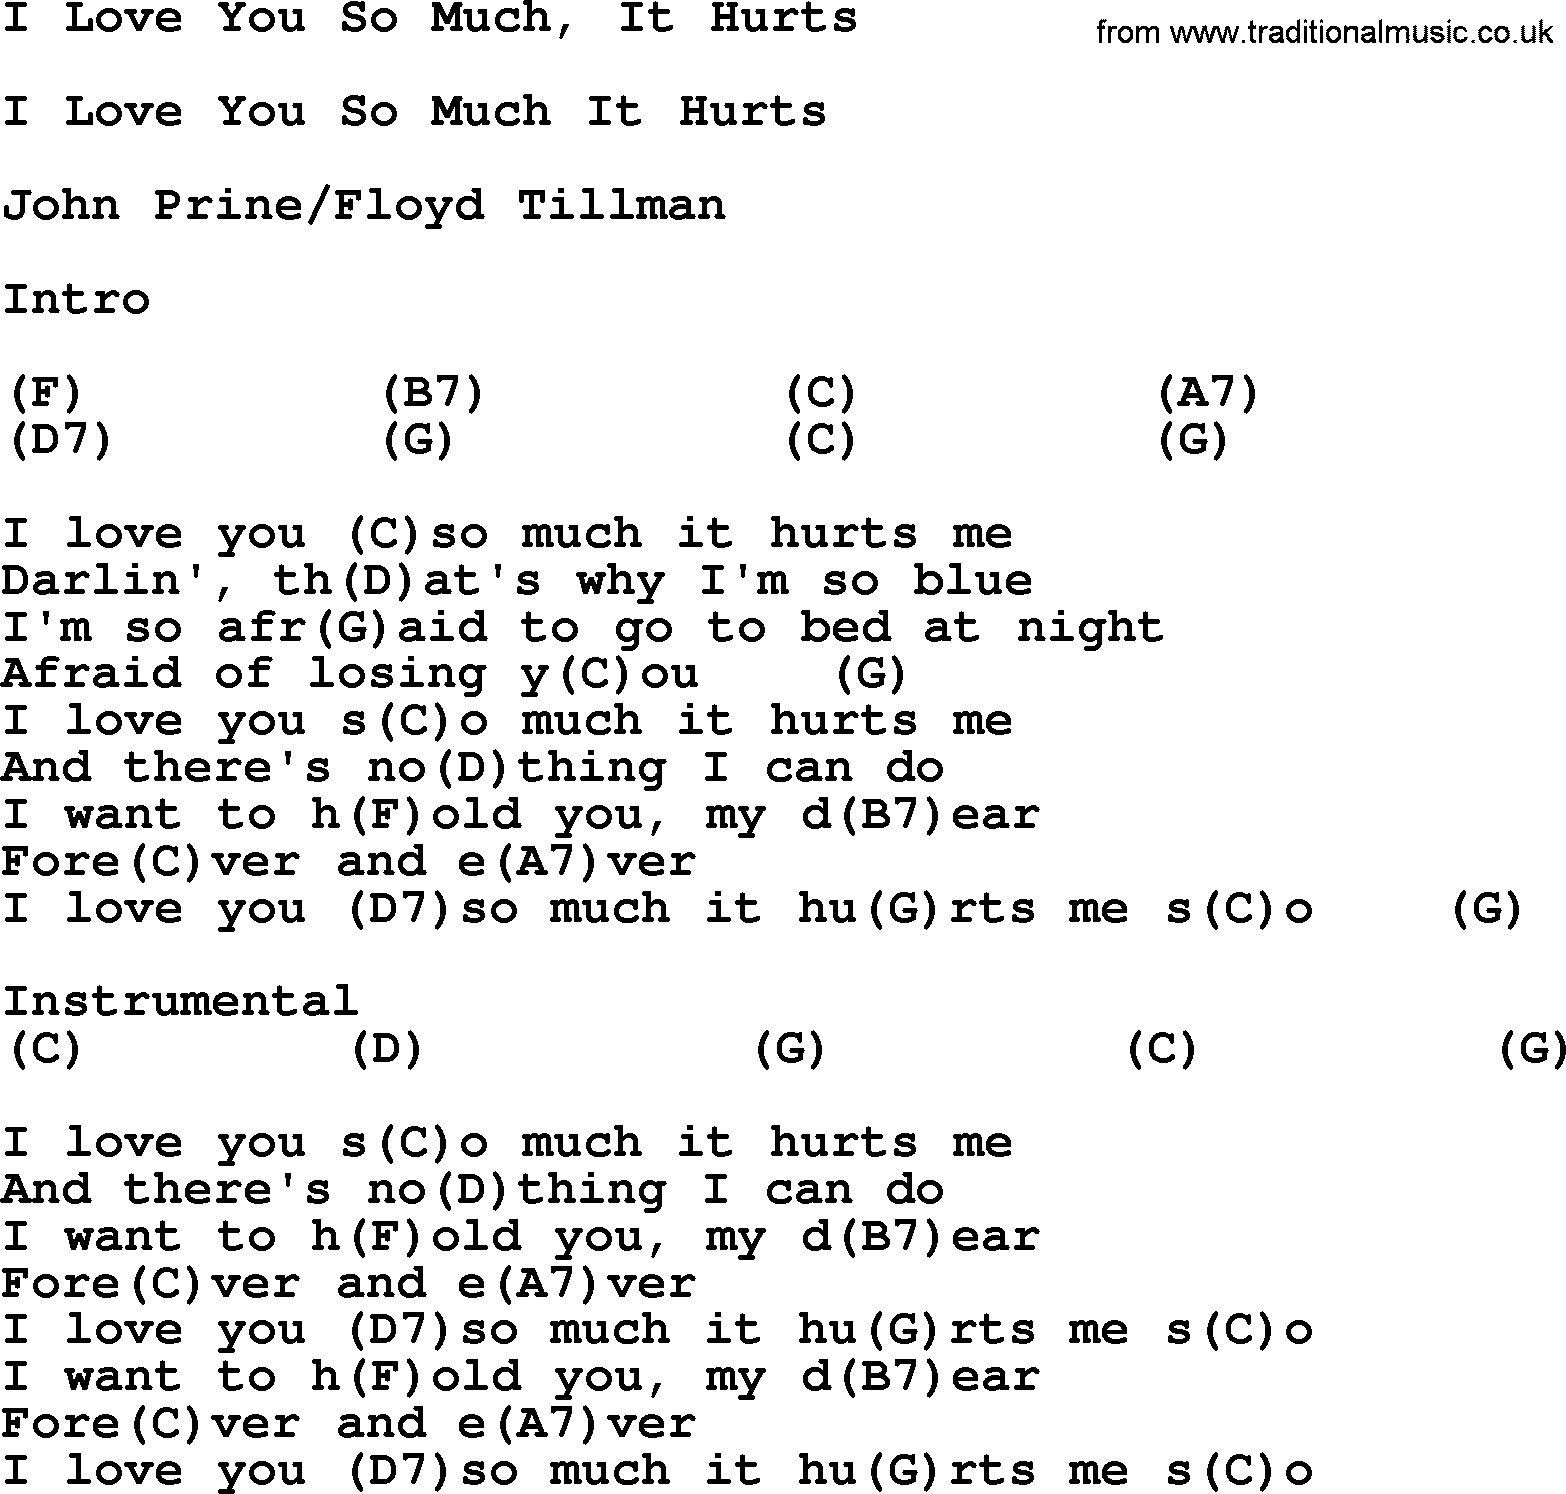 Bluegrass song: I Love You So Much, It Hurts, lyrics and chords